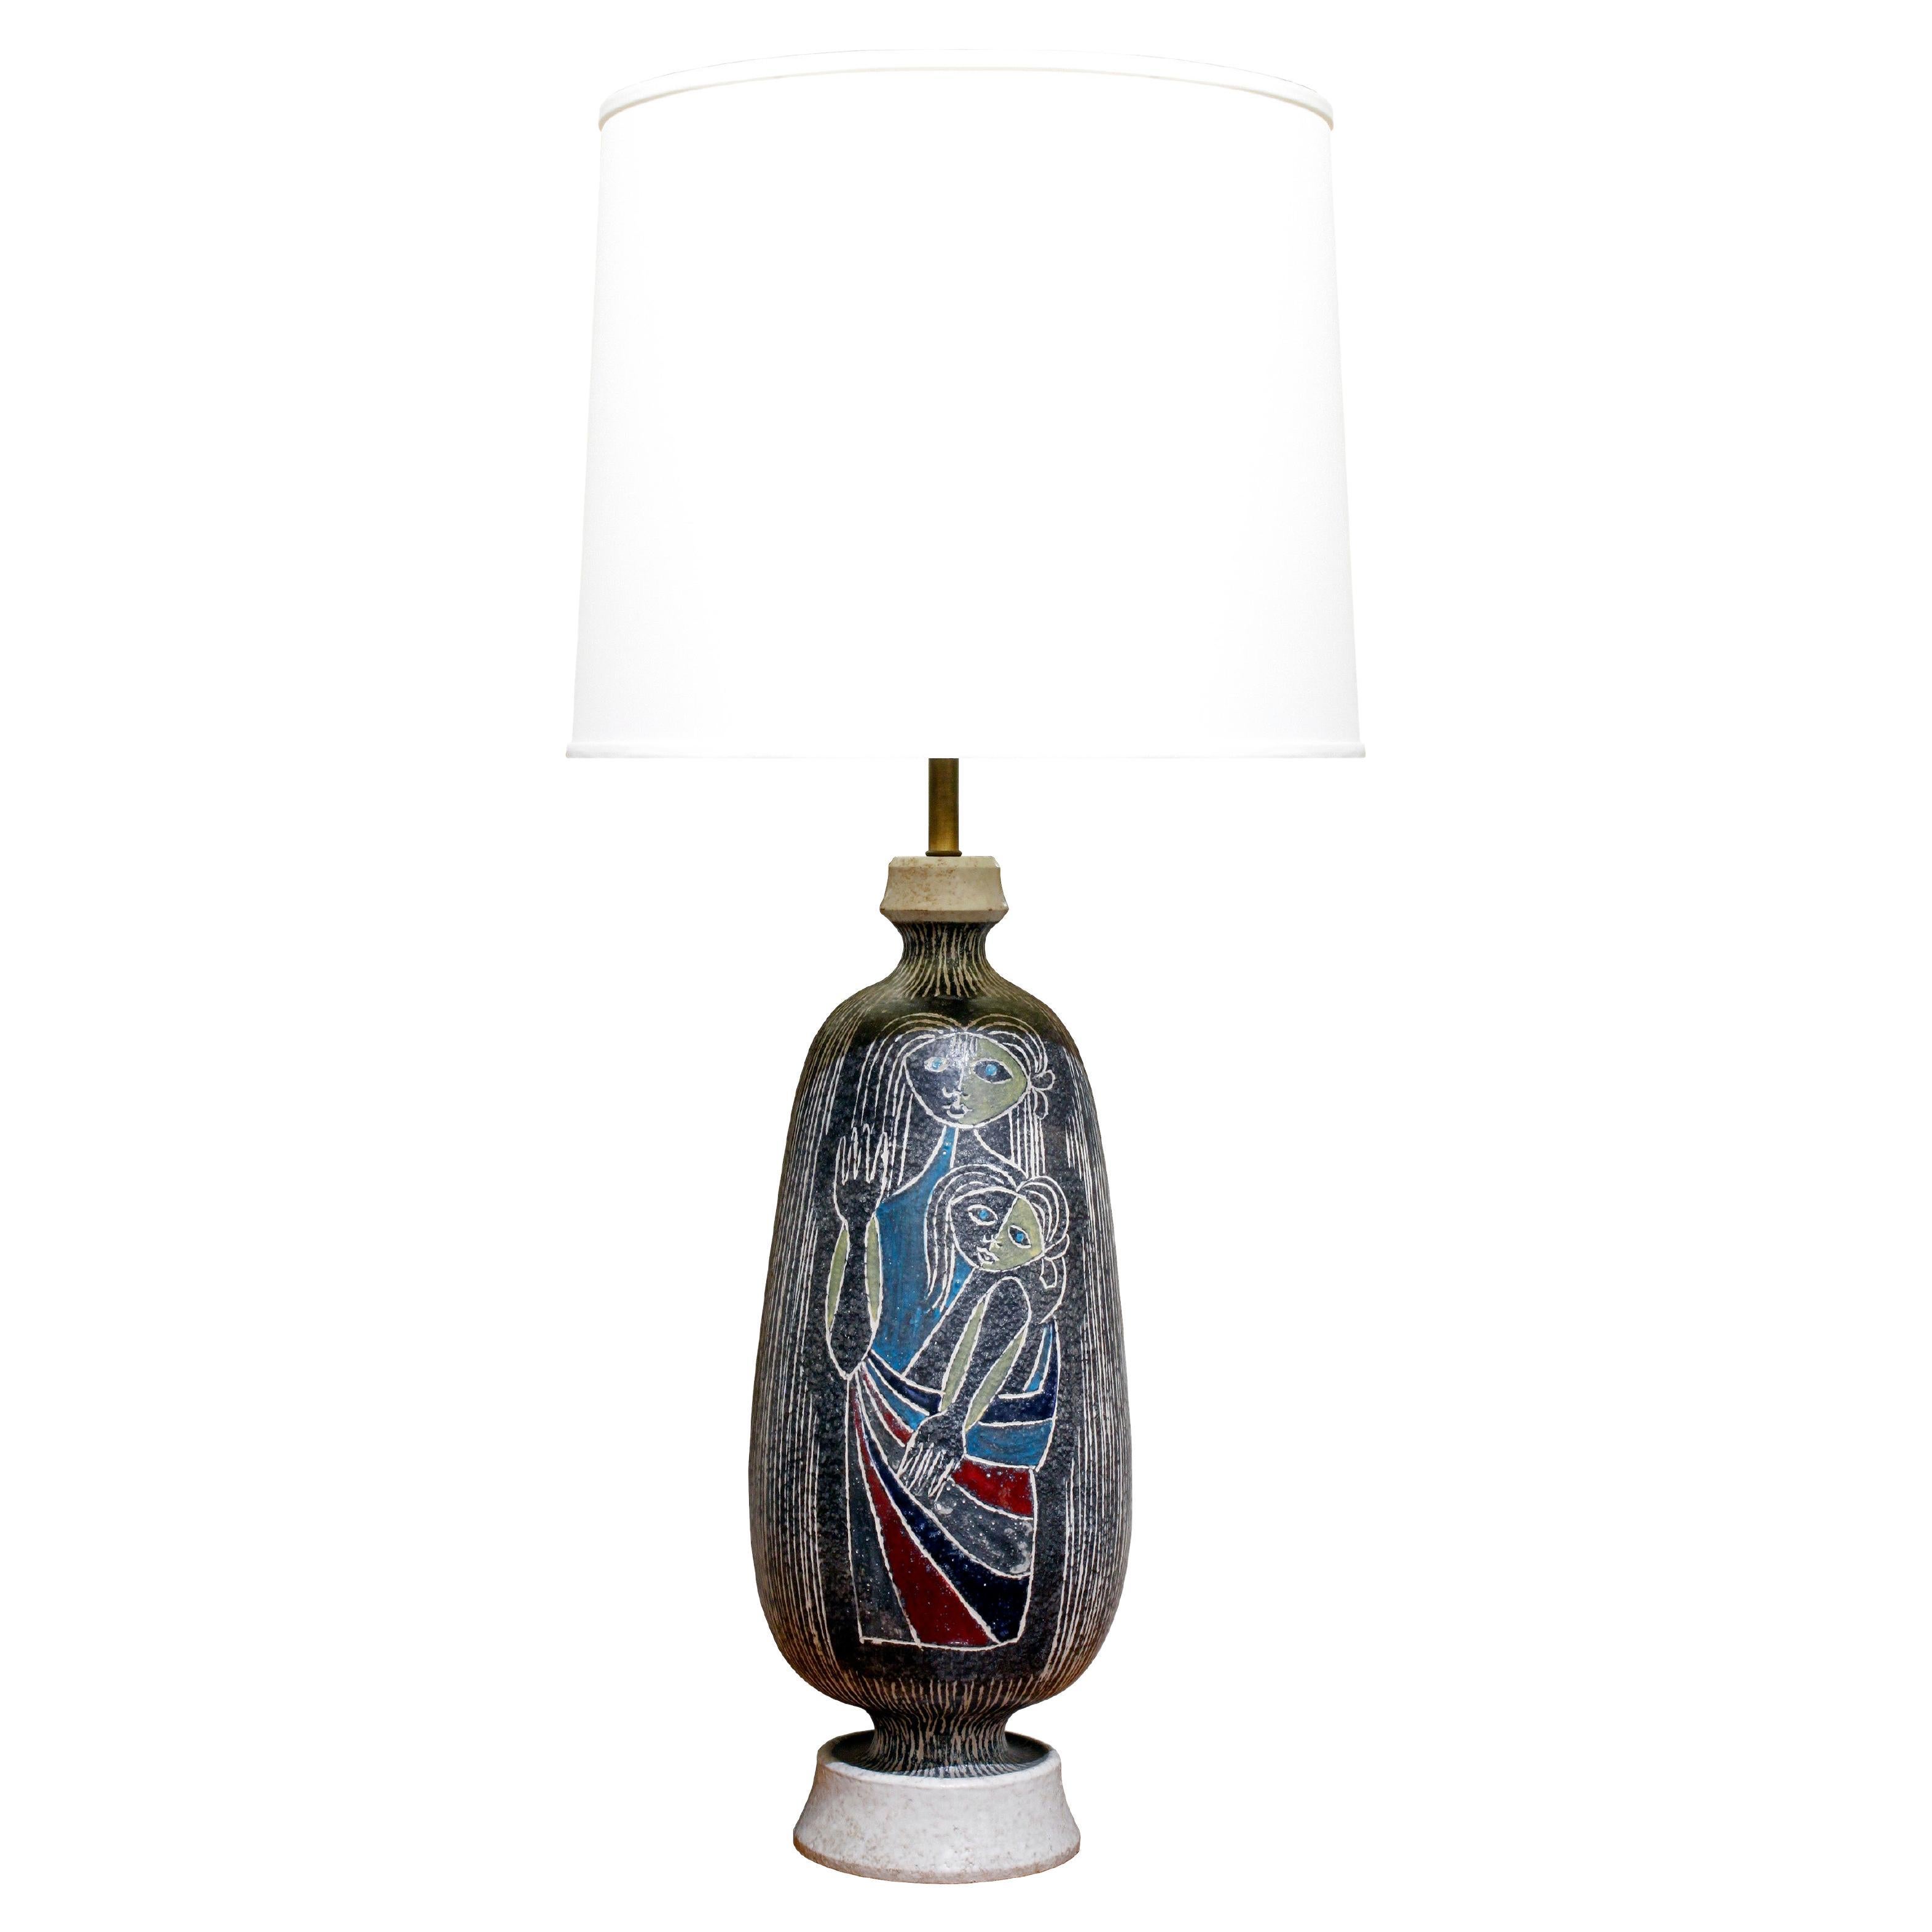 Italian Hand-Thrown Ceramic Table Lamp with Mother and Child Motif, 1950s